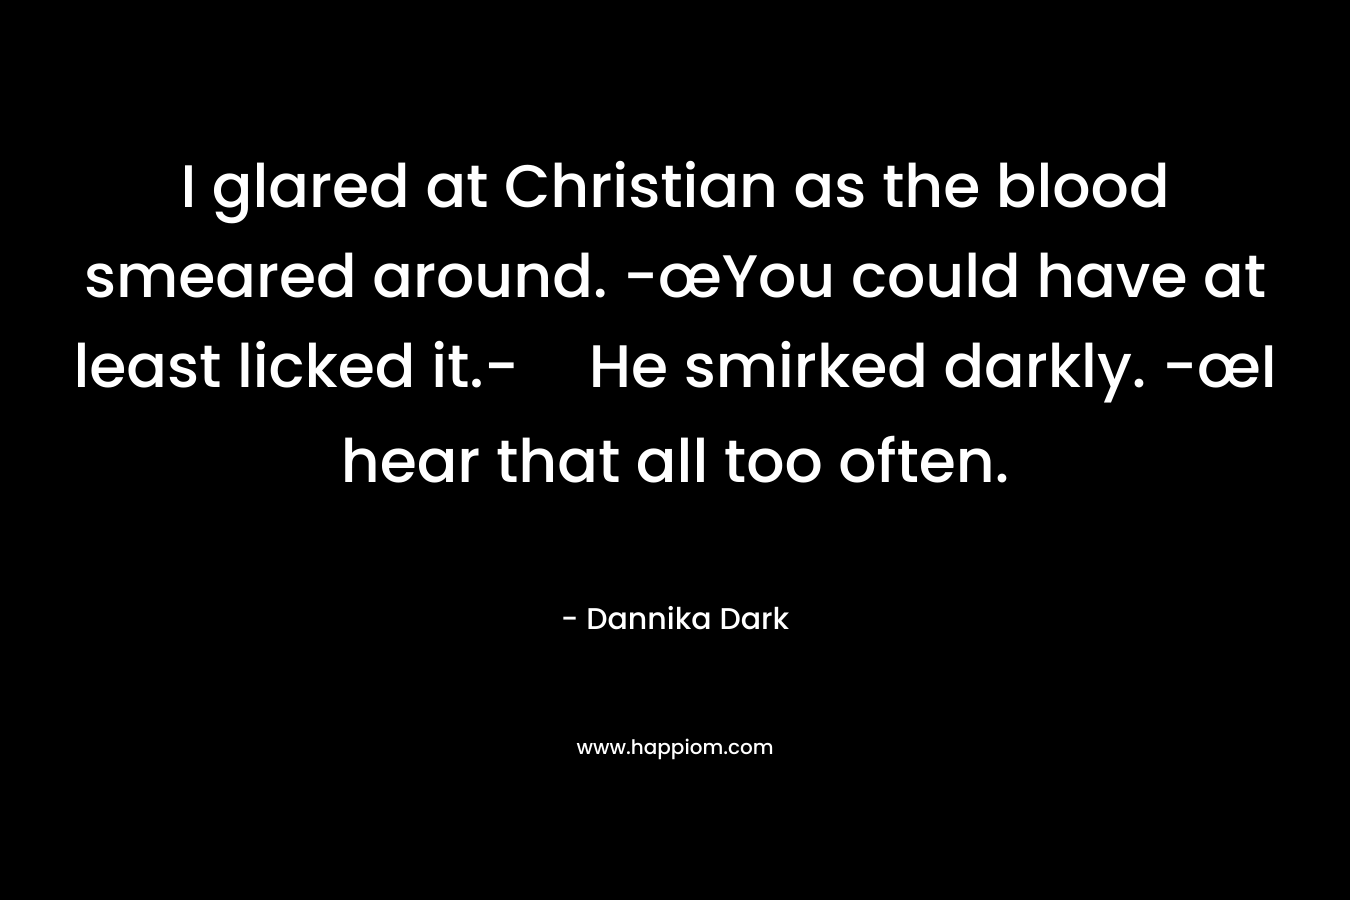 I glared at Christian as the blood smeared around. -œYou could have at least licked it.-He smirked darkly. -œI hear that all too often. – Dannika Dark